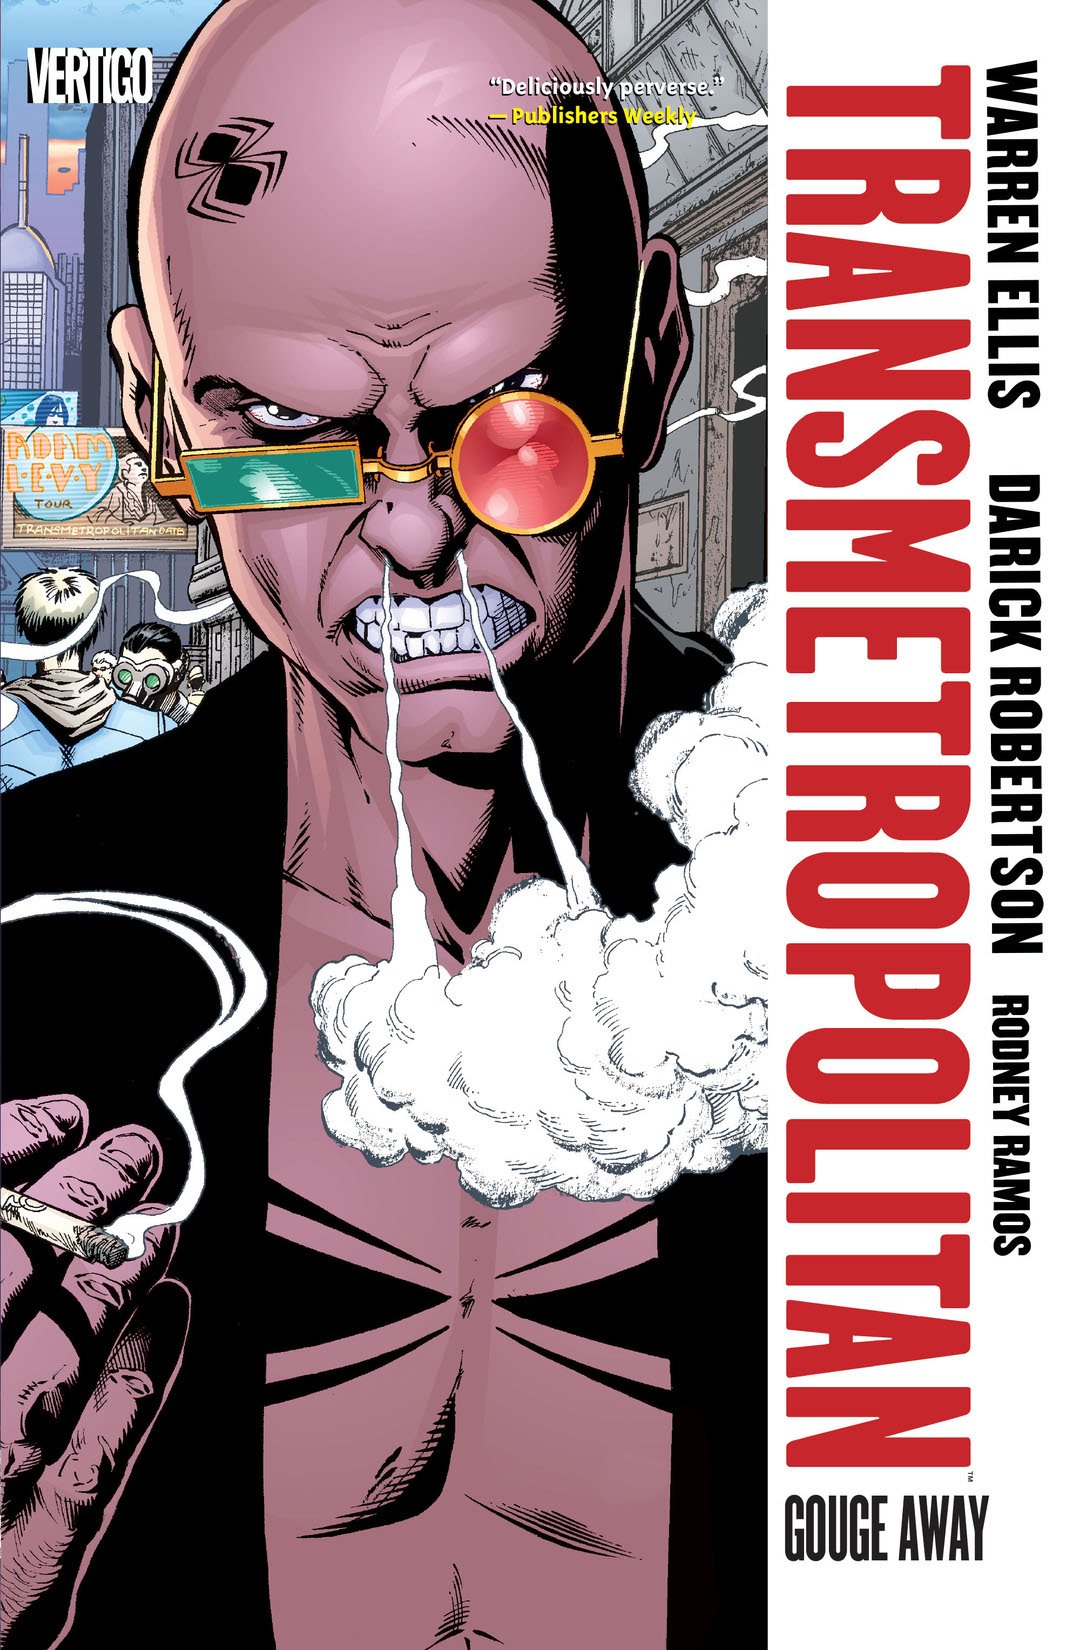 Transmetropolitan Vol. 6: Gouge Away (New Edition) preview images